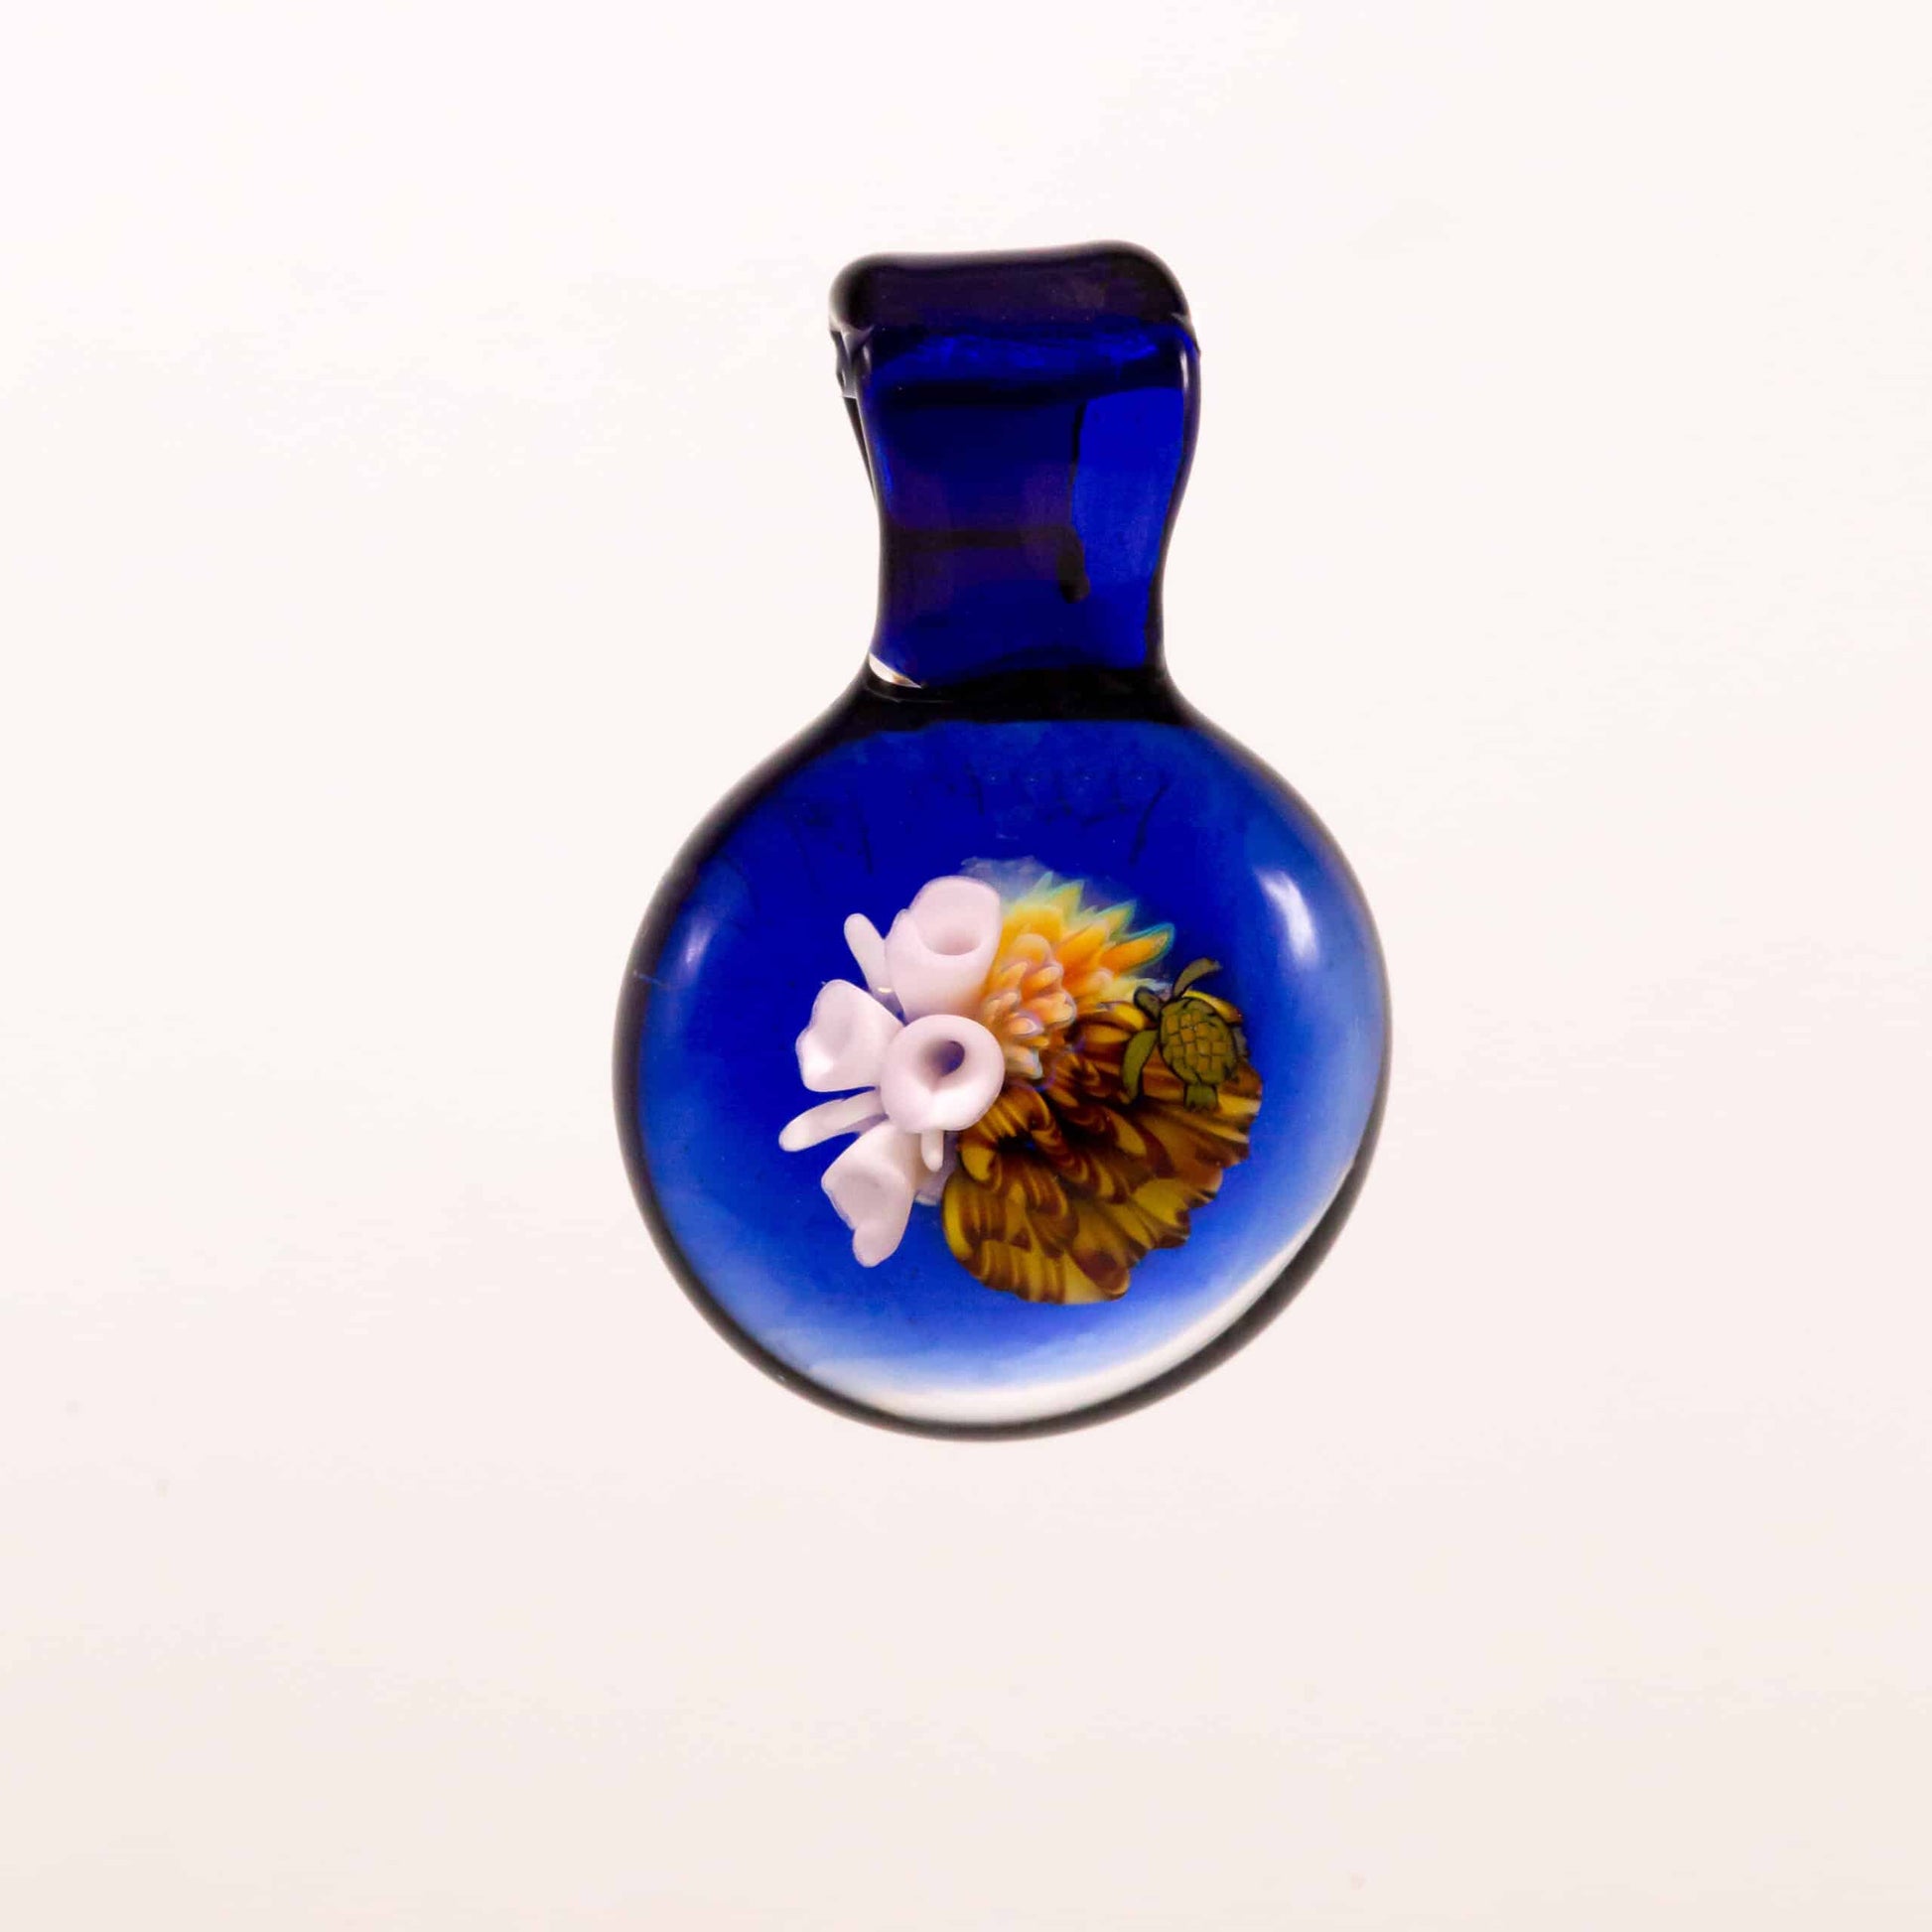 luxurious glass pendant - Coral Reef Pendant (BLUE, SEA TURTLE) #7 BY KIMMO